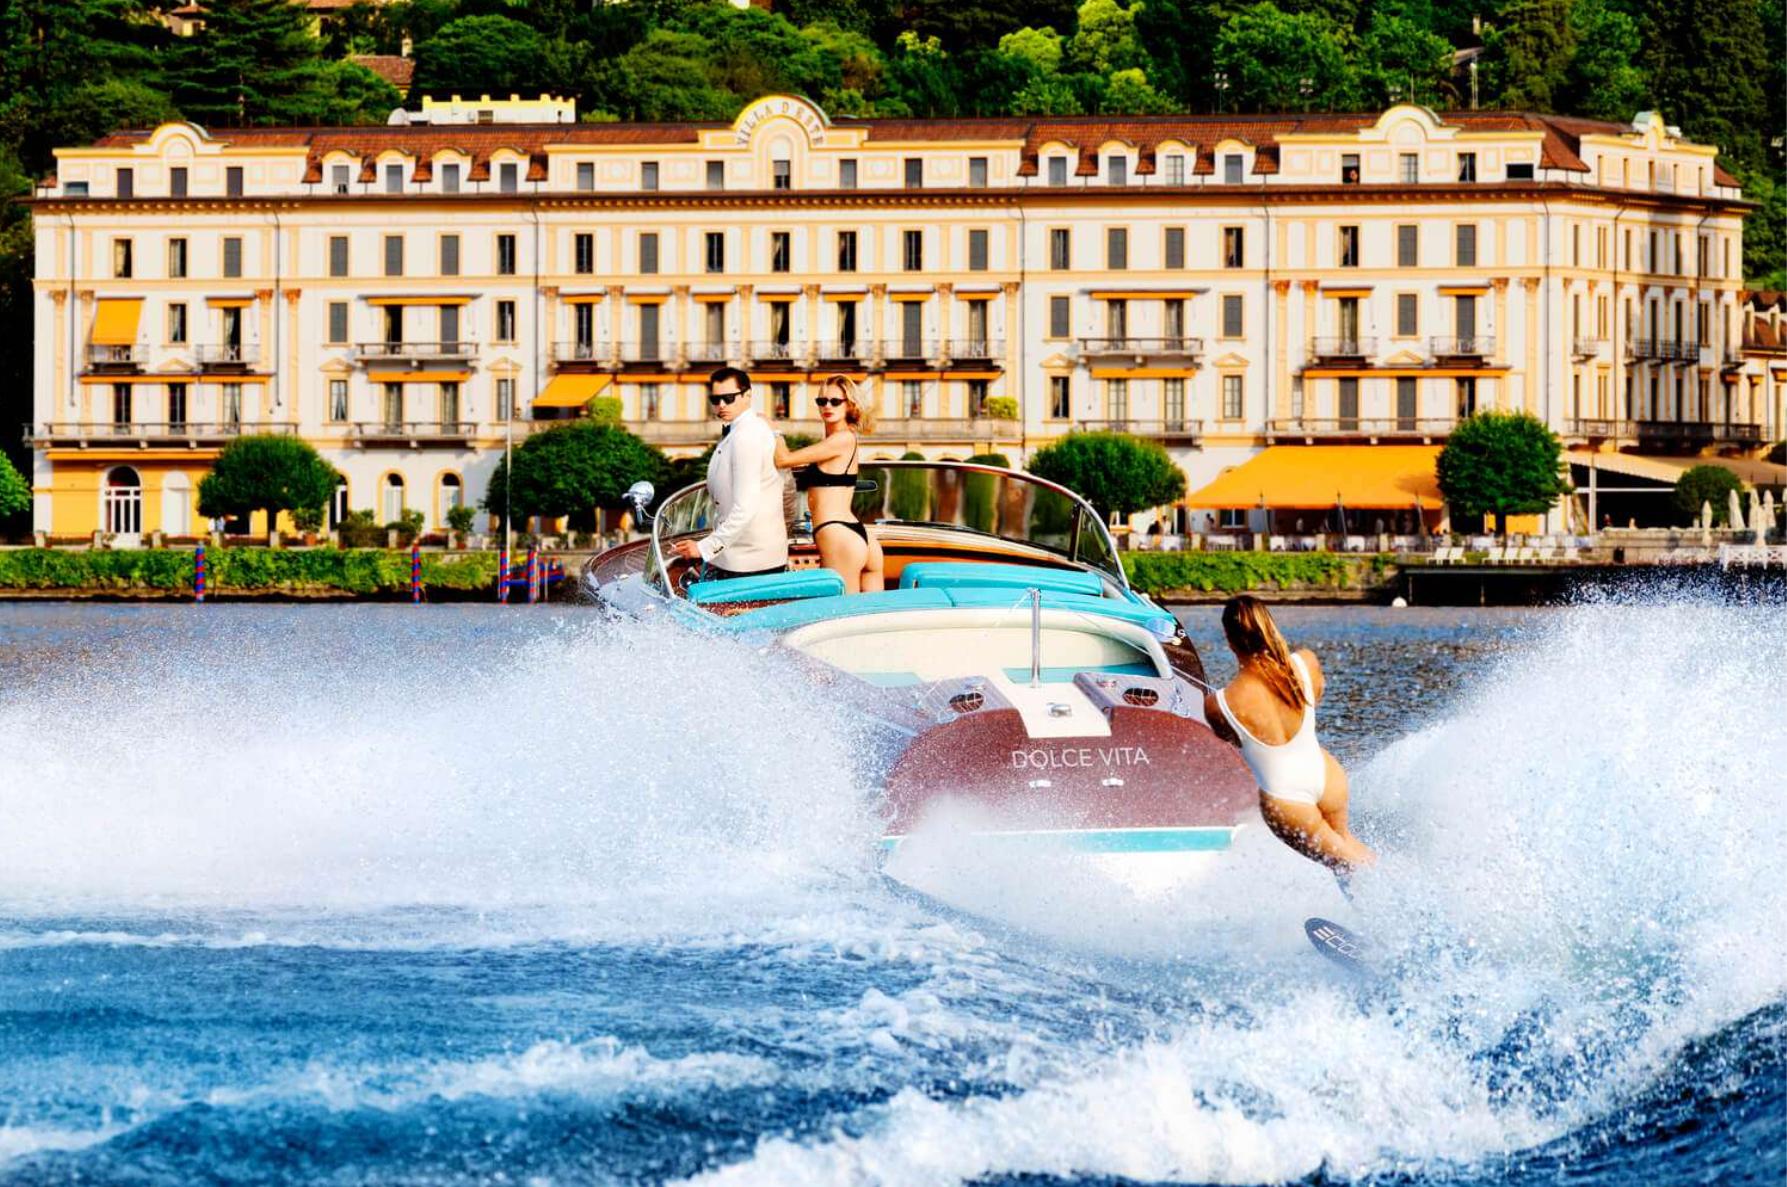 Tony Kelly Figurative Photograph - 'Lunch for Three at Two' - waterskiing at Lake Como, fine art photography, 2023